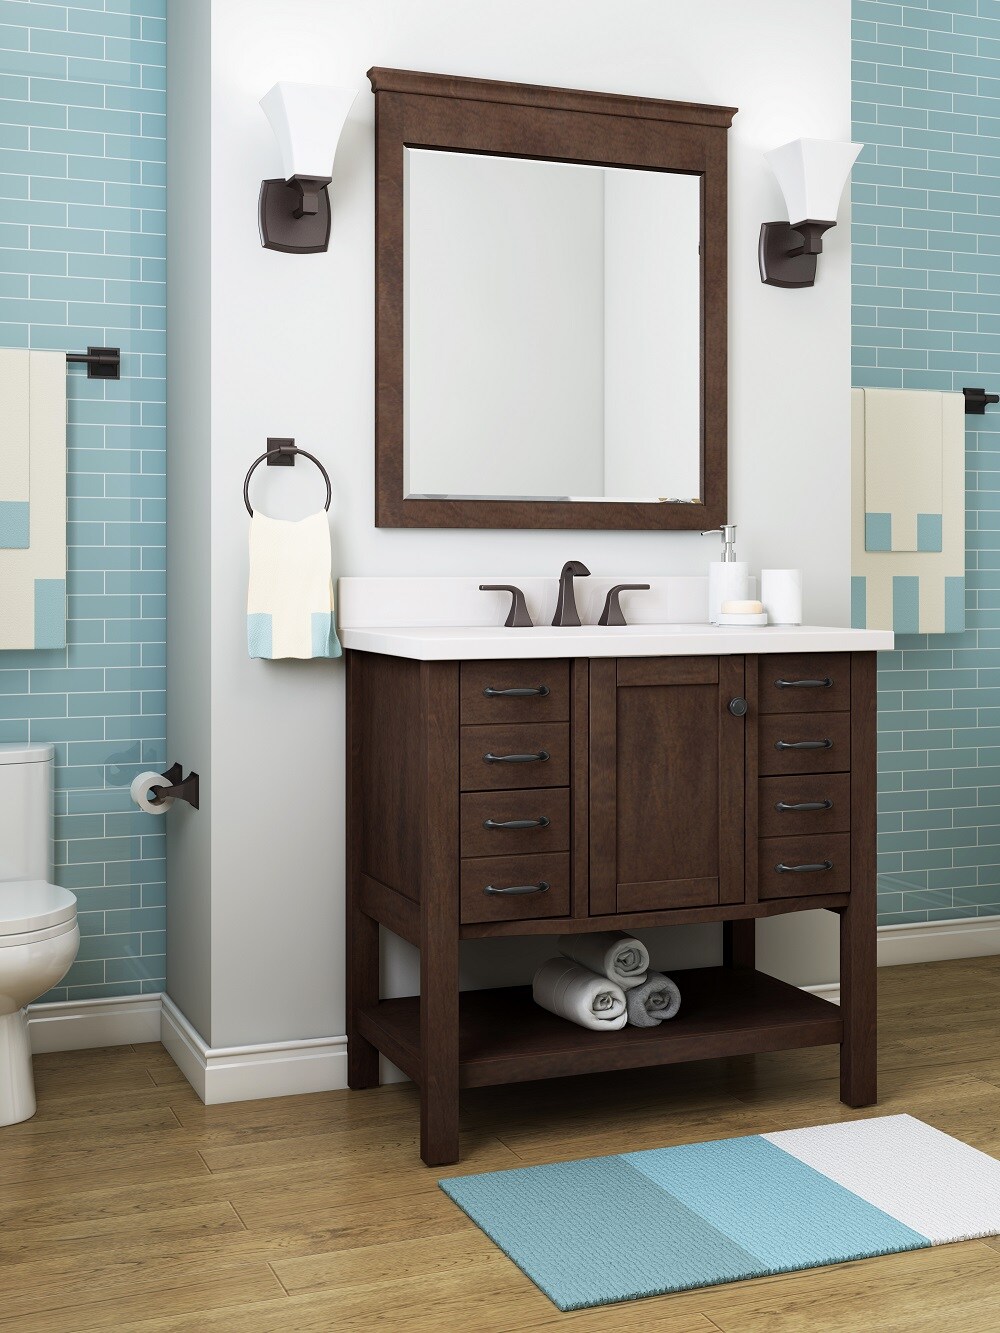 Bathroom 36-in at in Tops roth Sink Vanities the Kingscote Engineered allen Single Espresso department with Stone Undermount White Vanity with Top Bathroom +